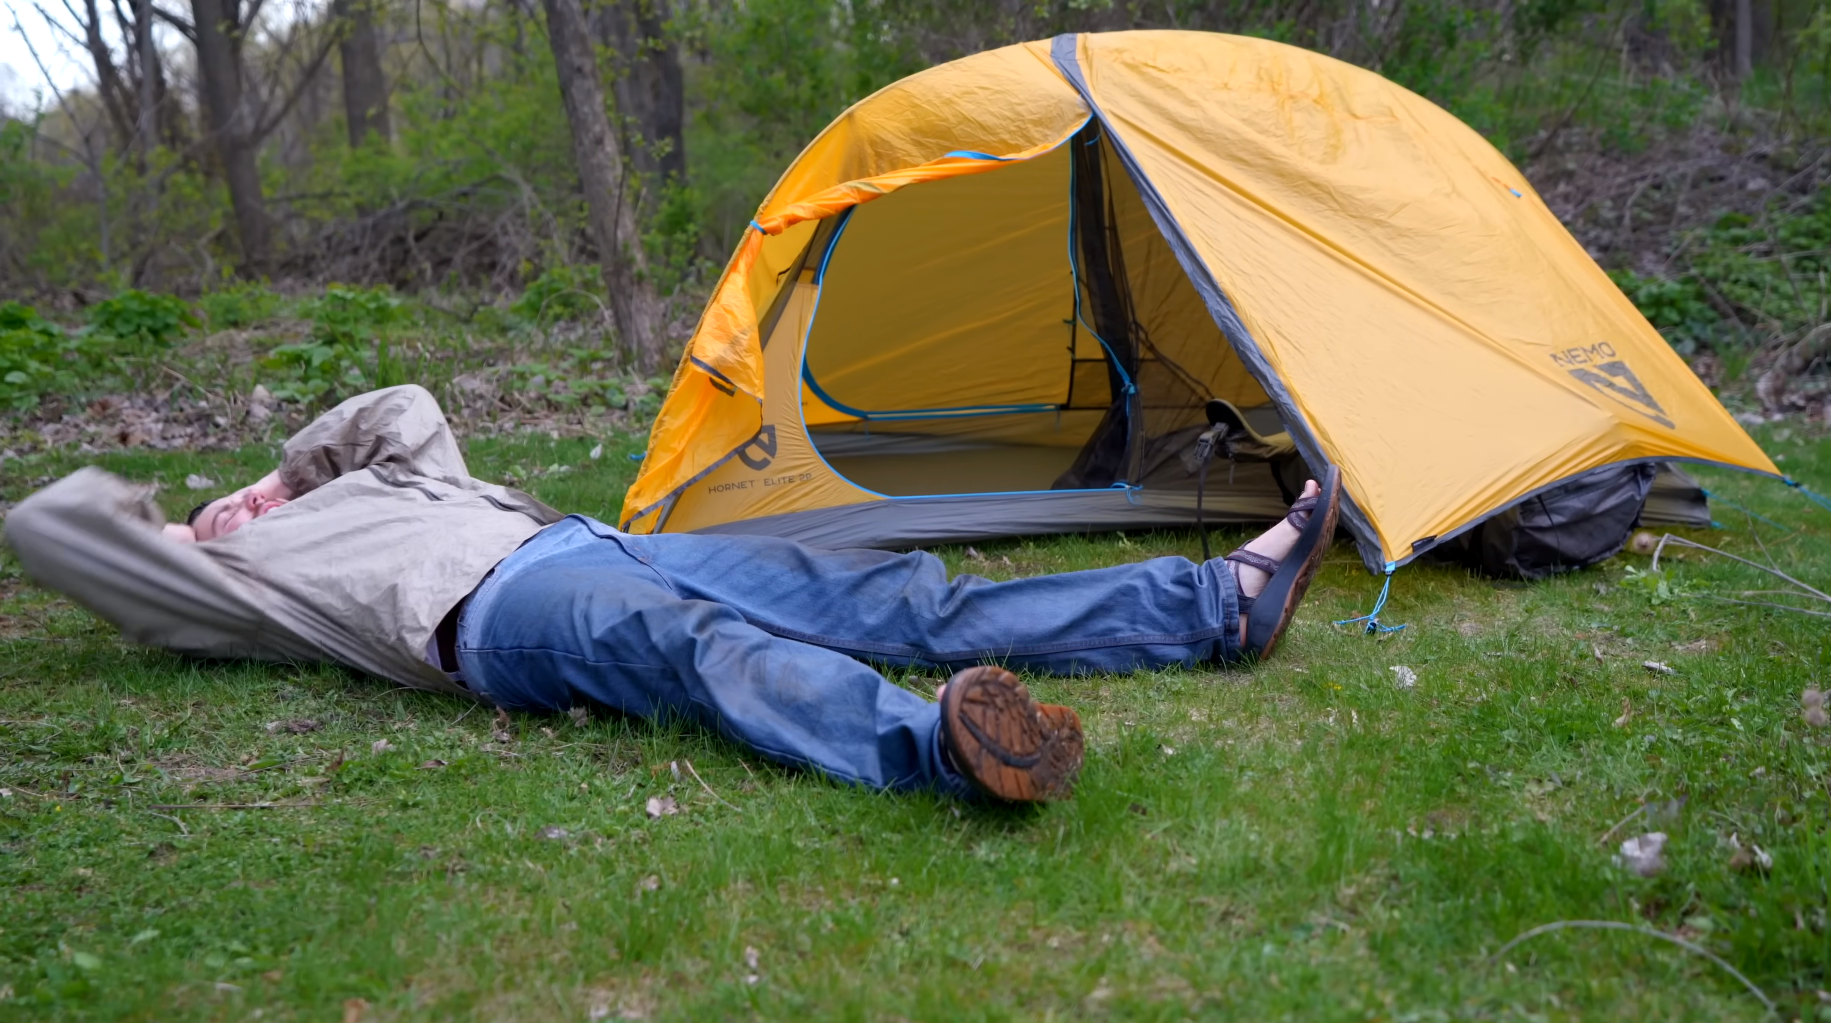 How to Prepare for a Camping Trip?